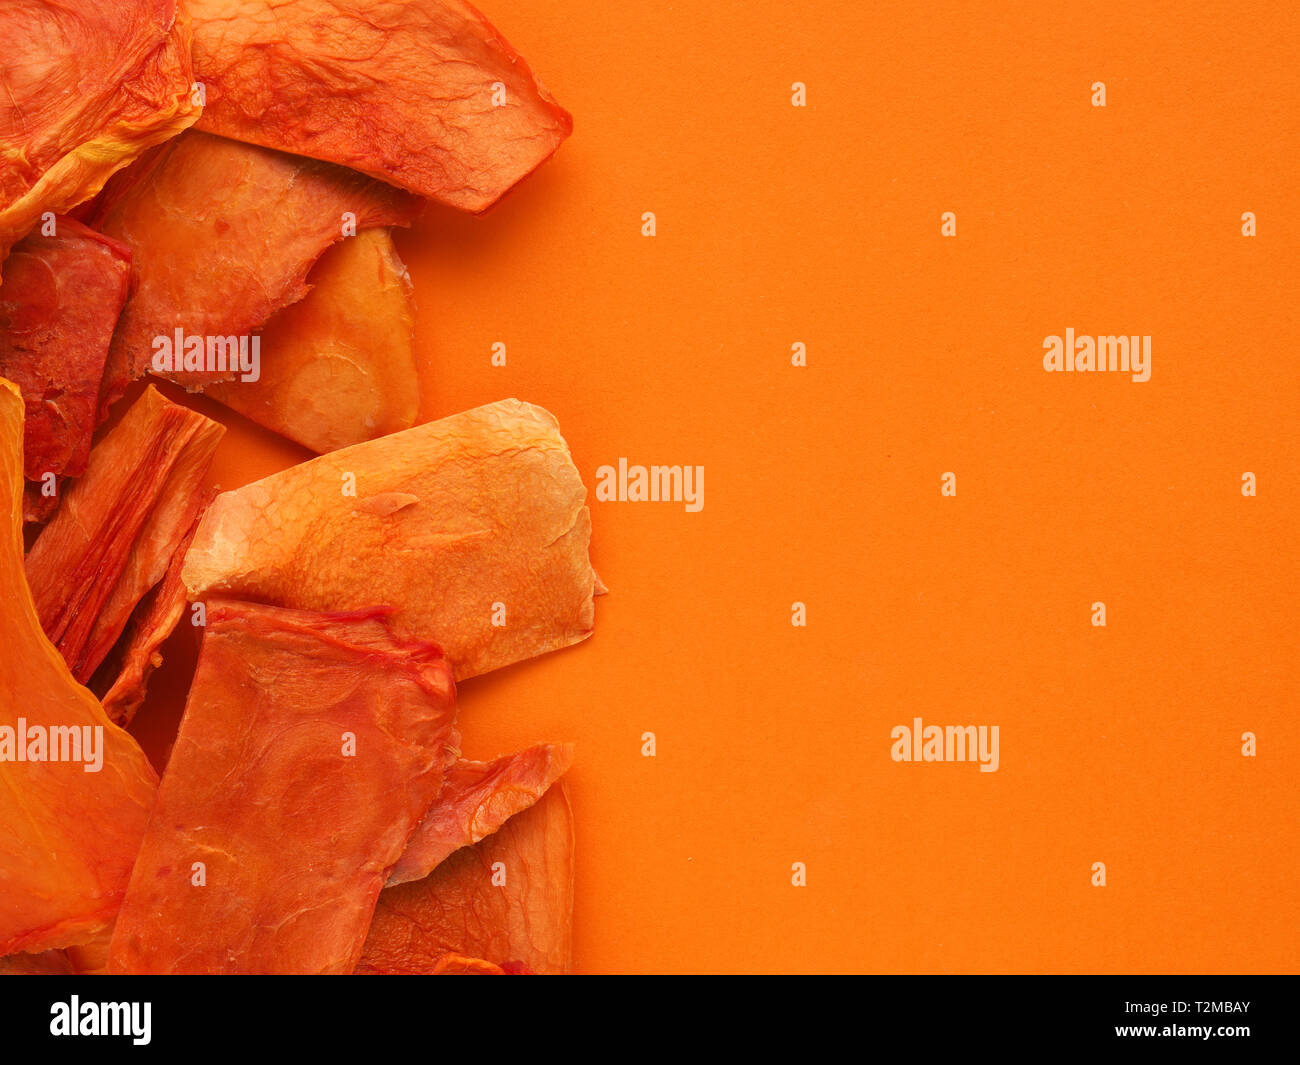 Dried organic papaya slices on an orange studio background, healthy food concept, view from above, space for text Stock Photo